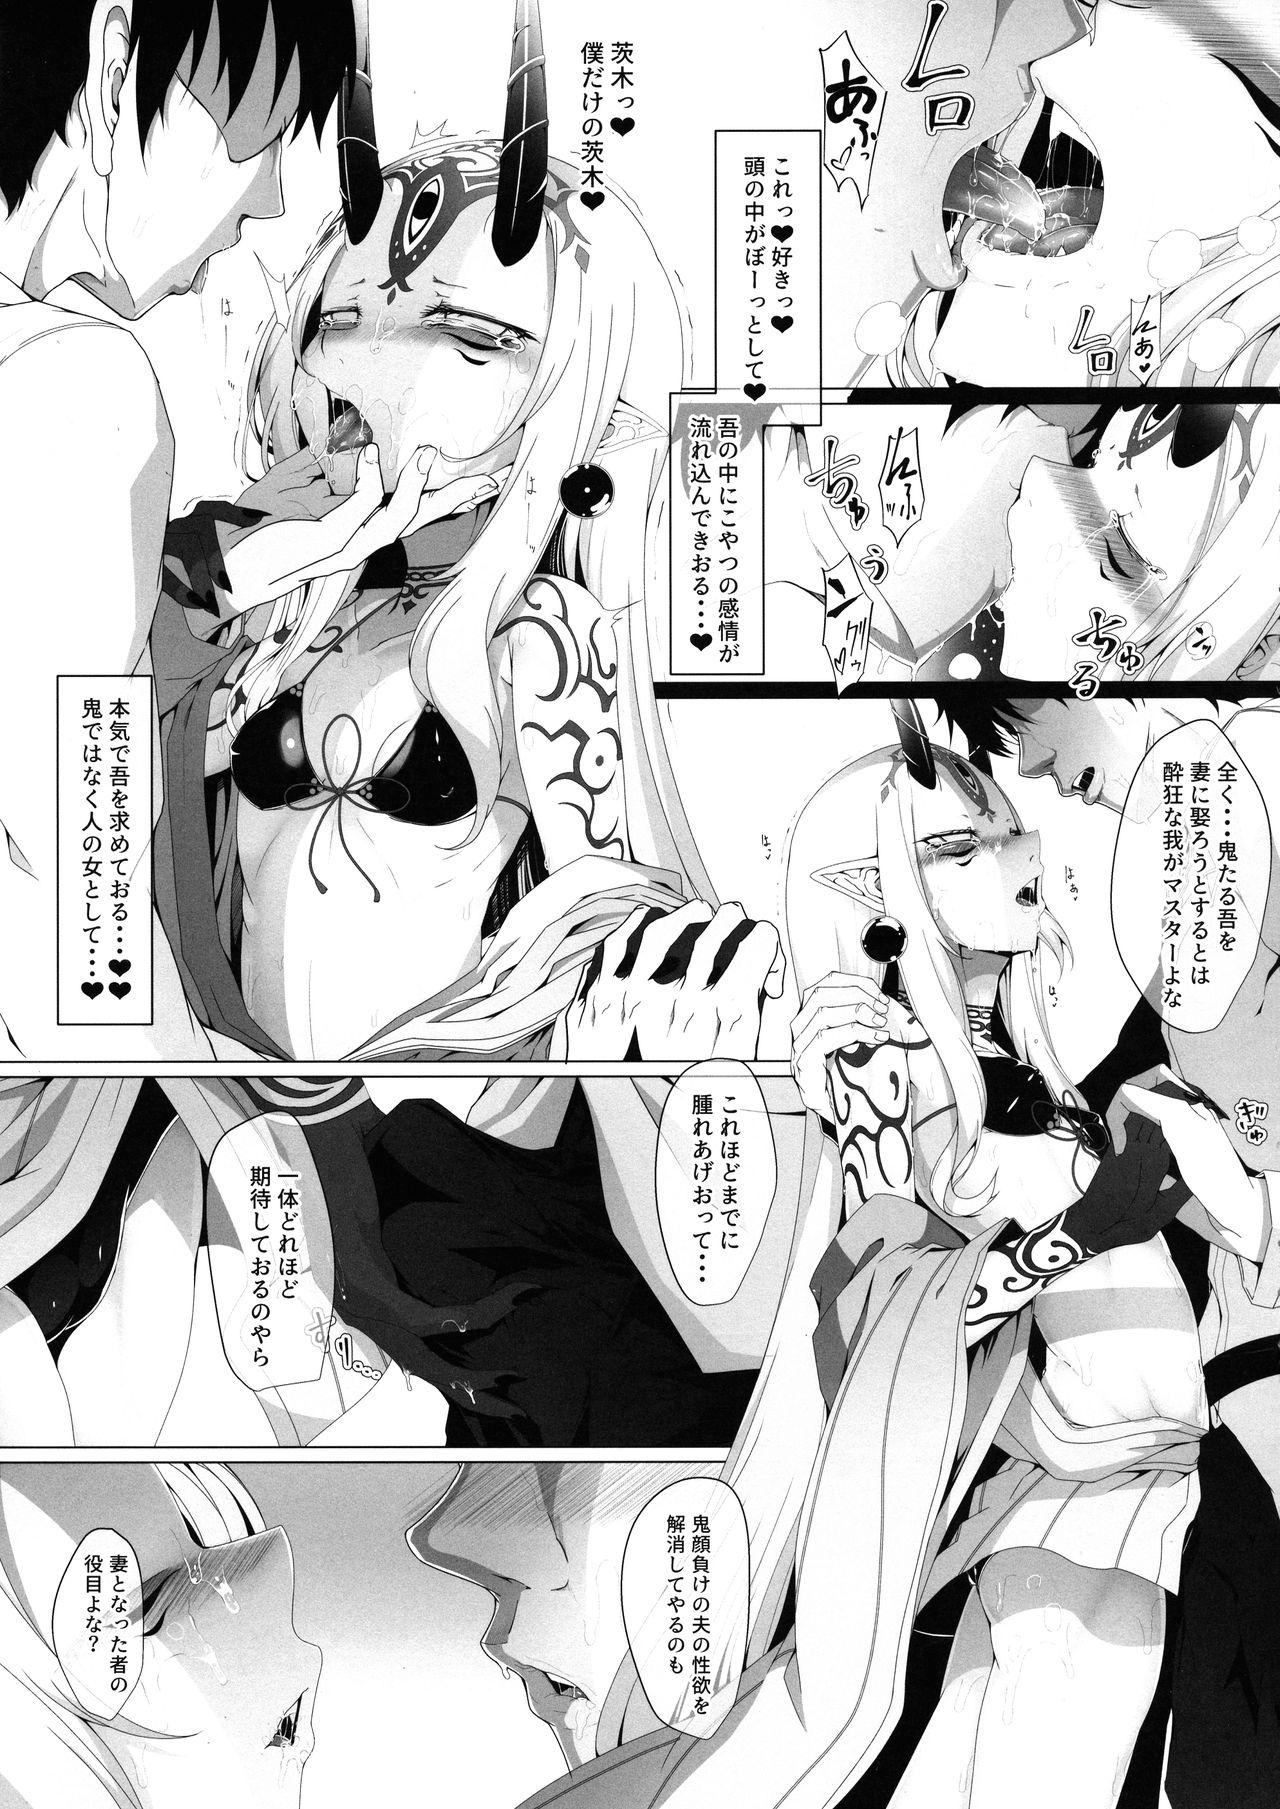 Girls Getting Fucked M.P. Vol. 20 - Fate grand order Sapphic Erotica - Page 5